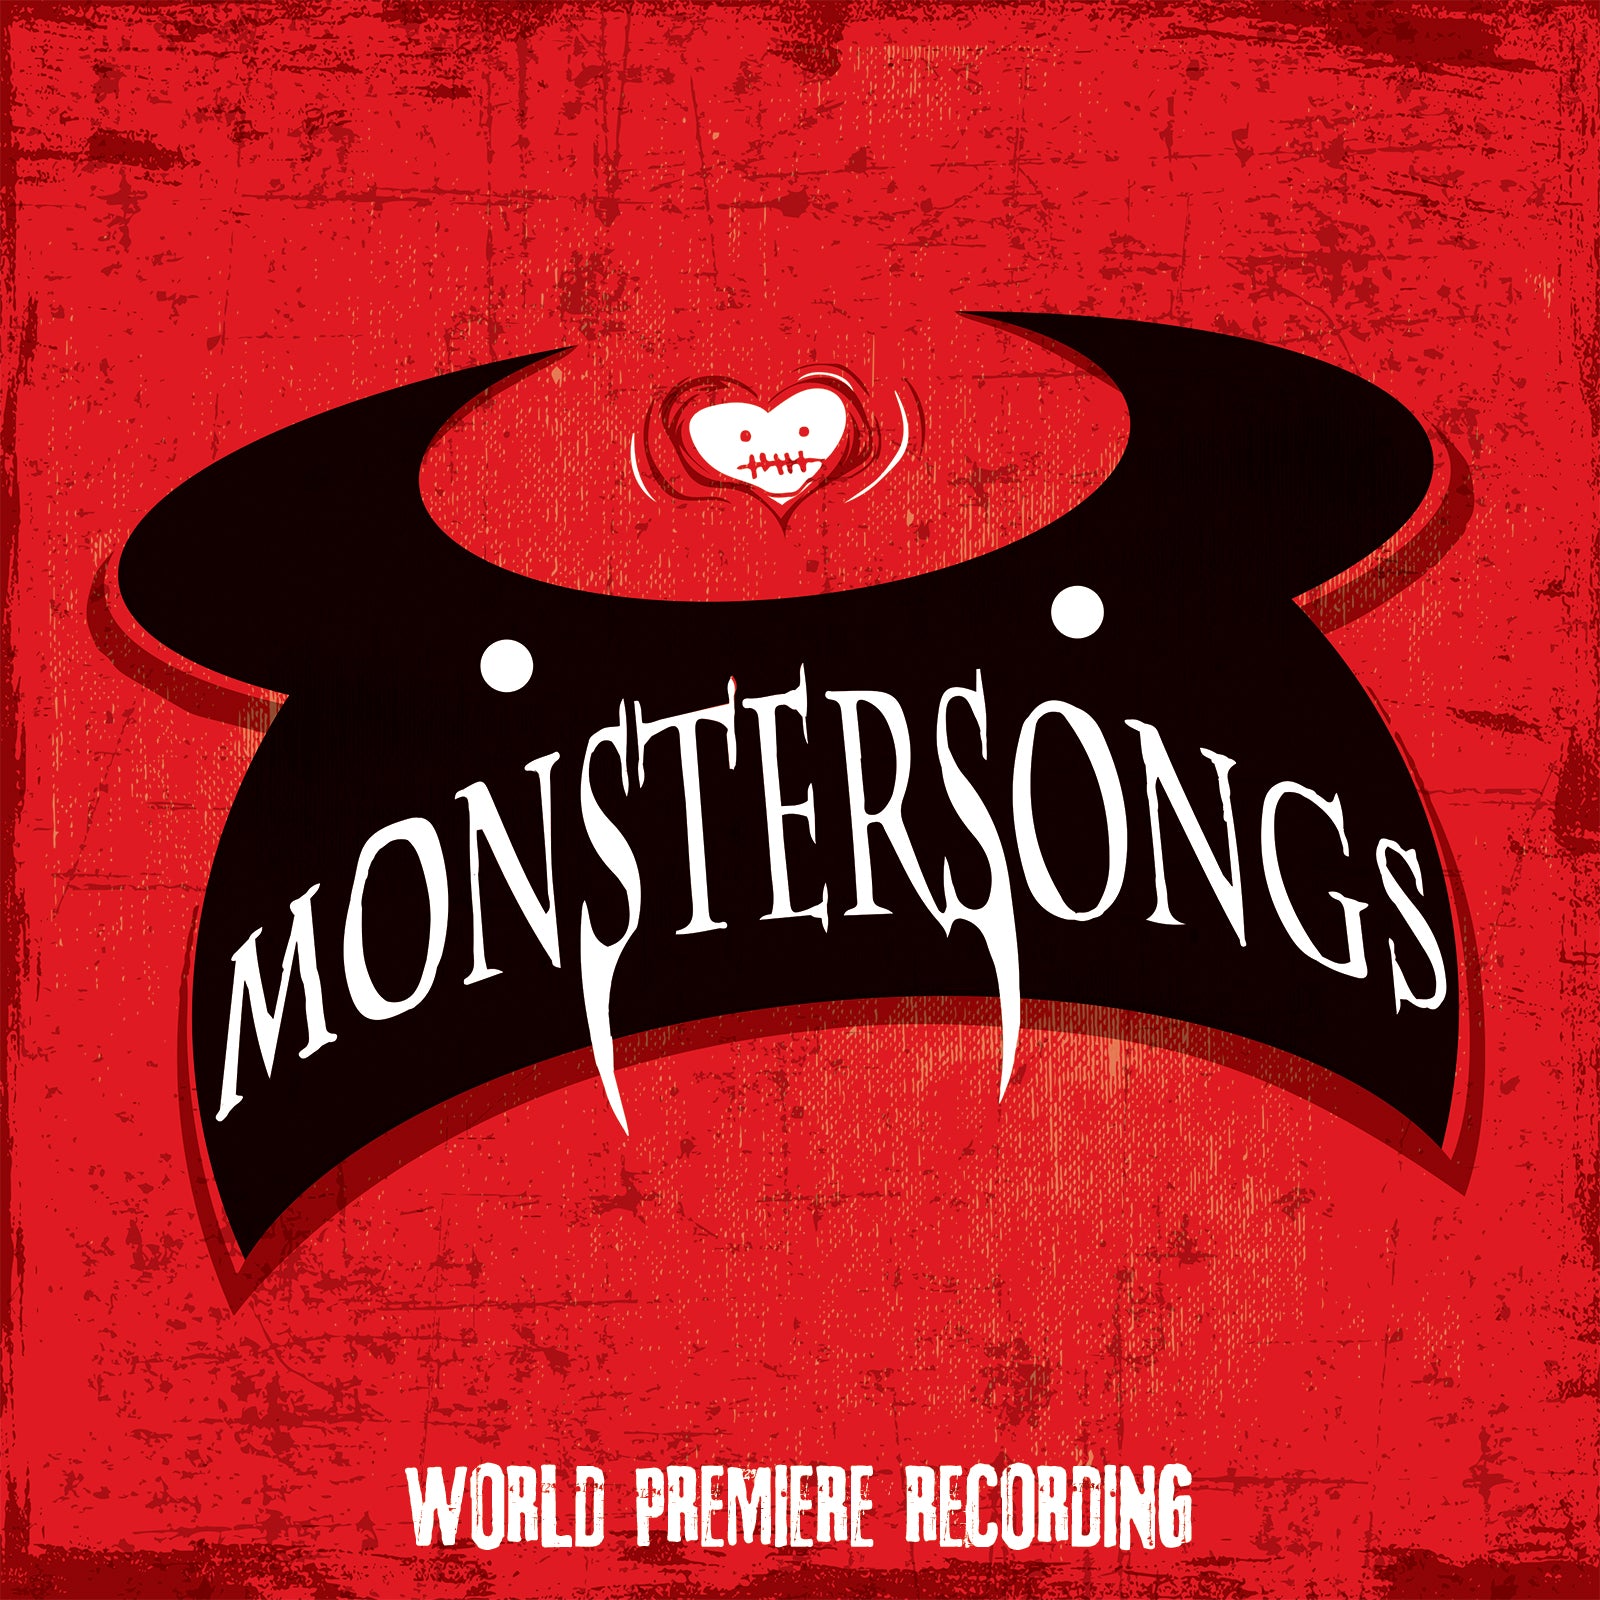 Monstersongs (World Premiere Recording) [CD]